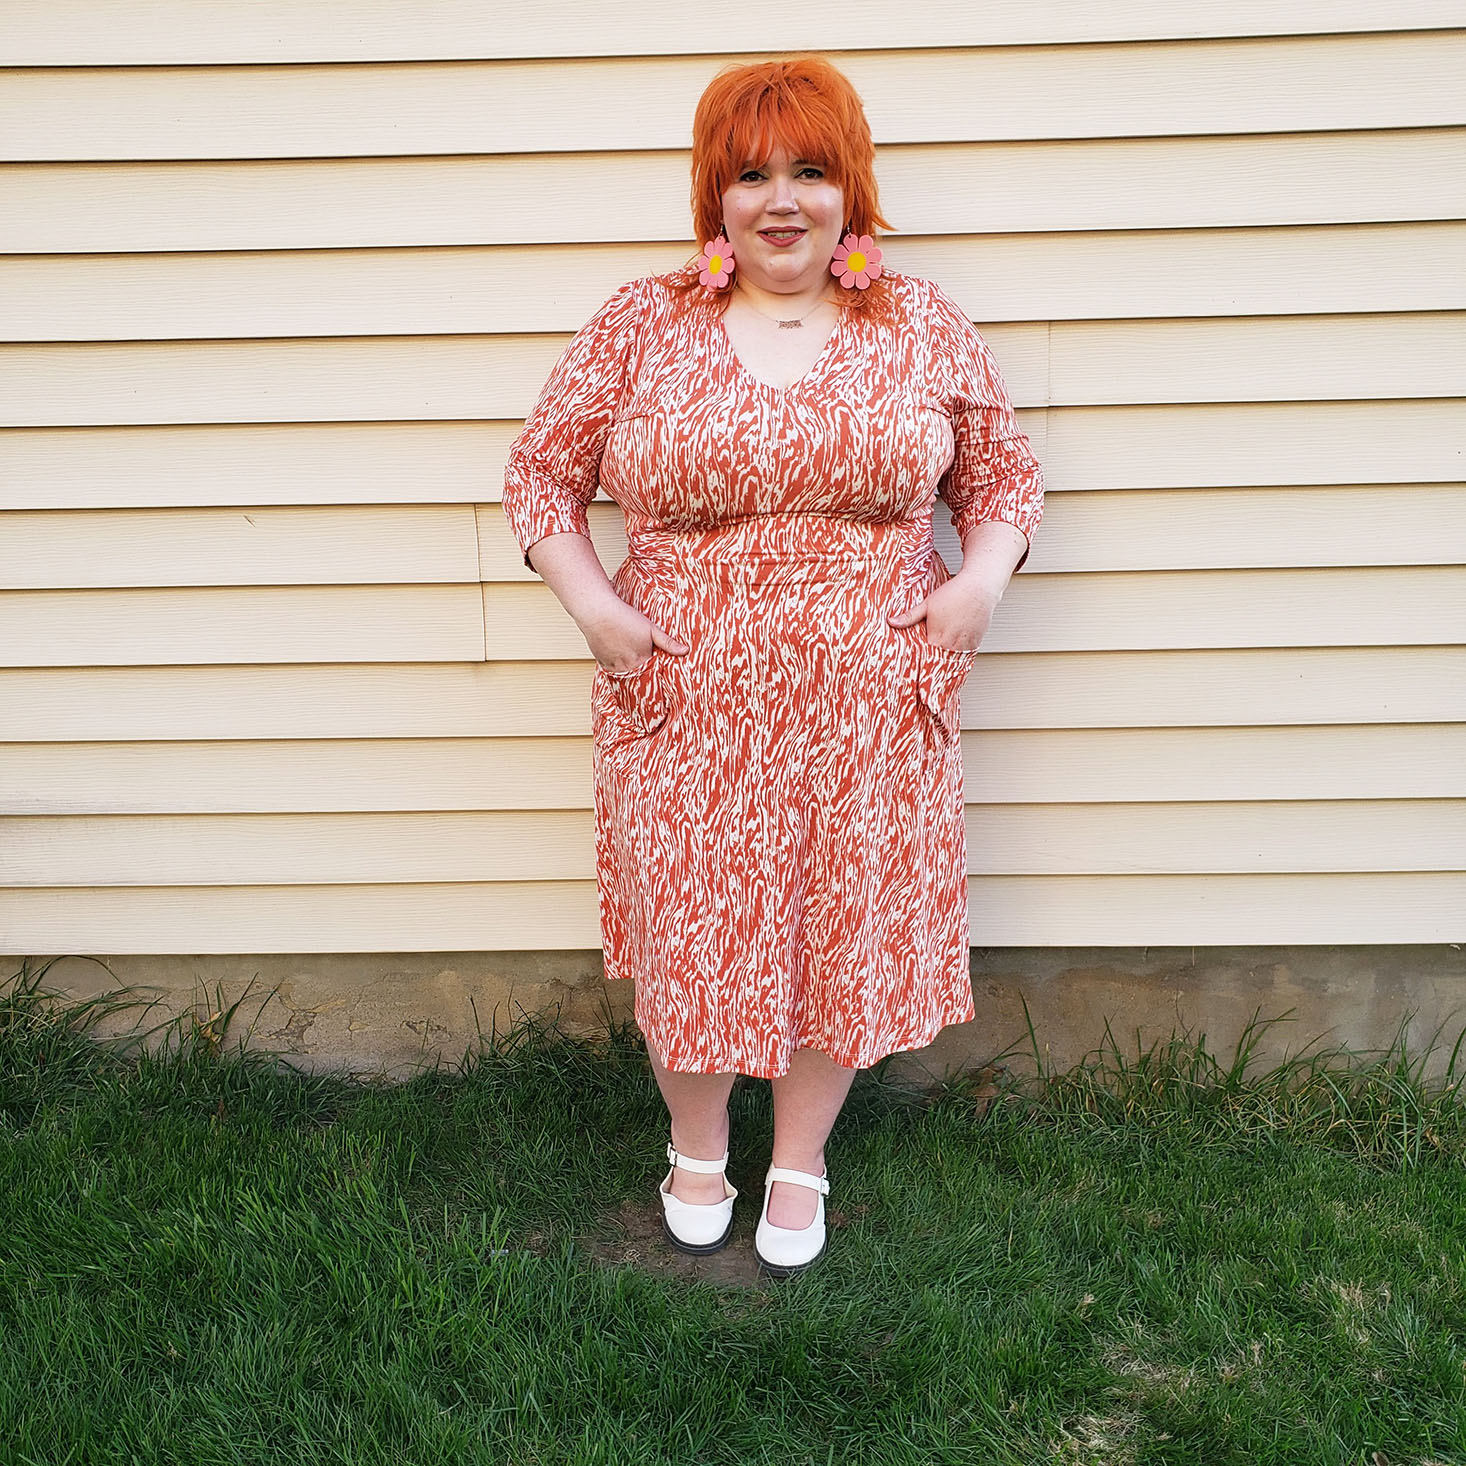 Gwynnie Bee Plus Size May 2022 Review + Coupon